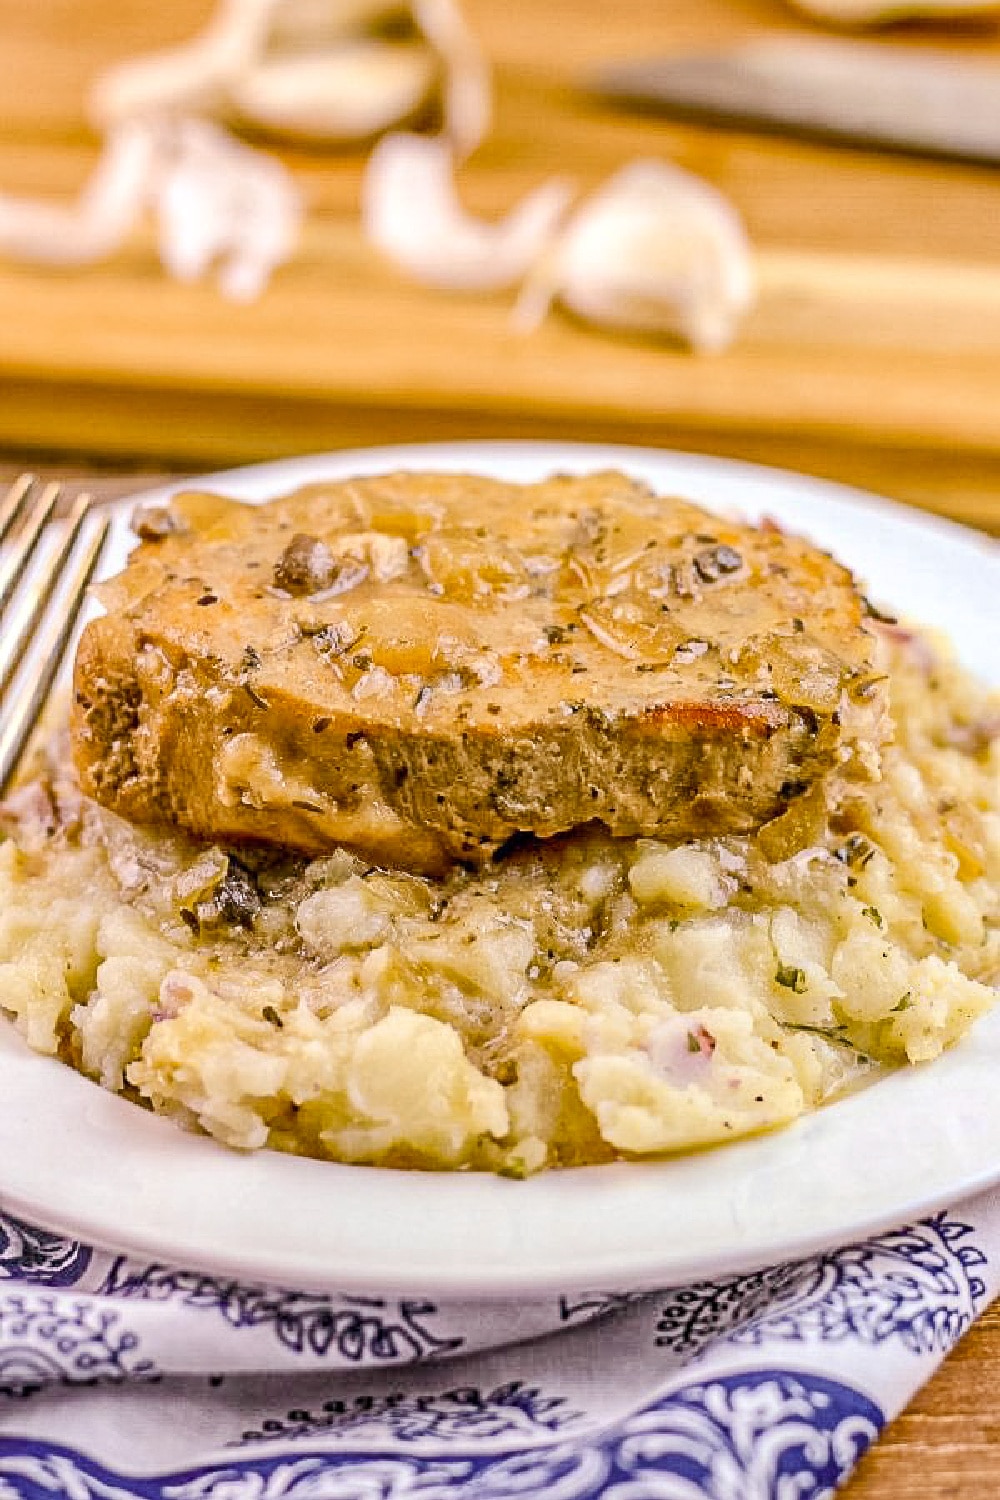 Pork Chop smothered in gravy sits on a bed of mashed potatoes.